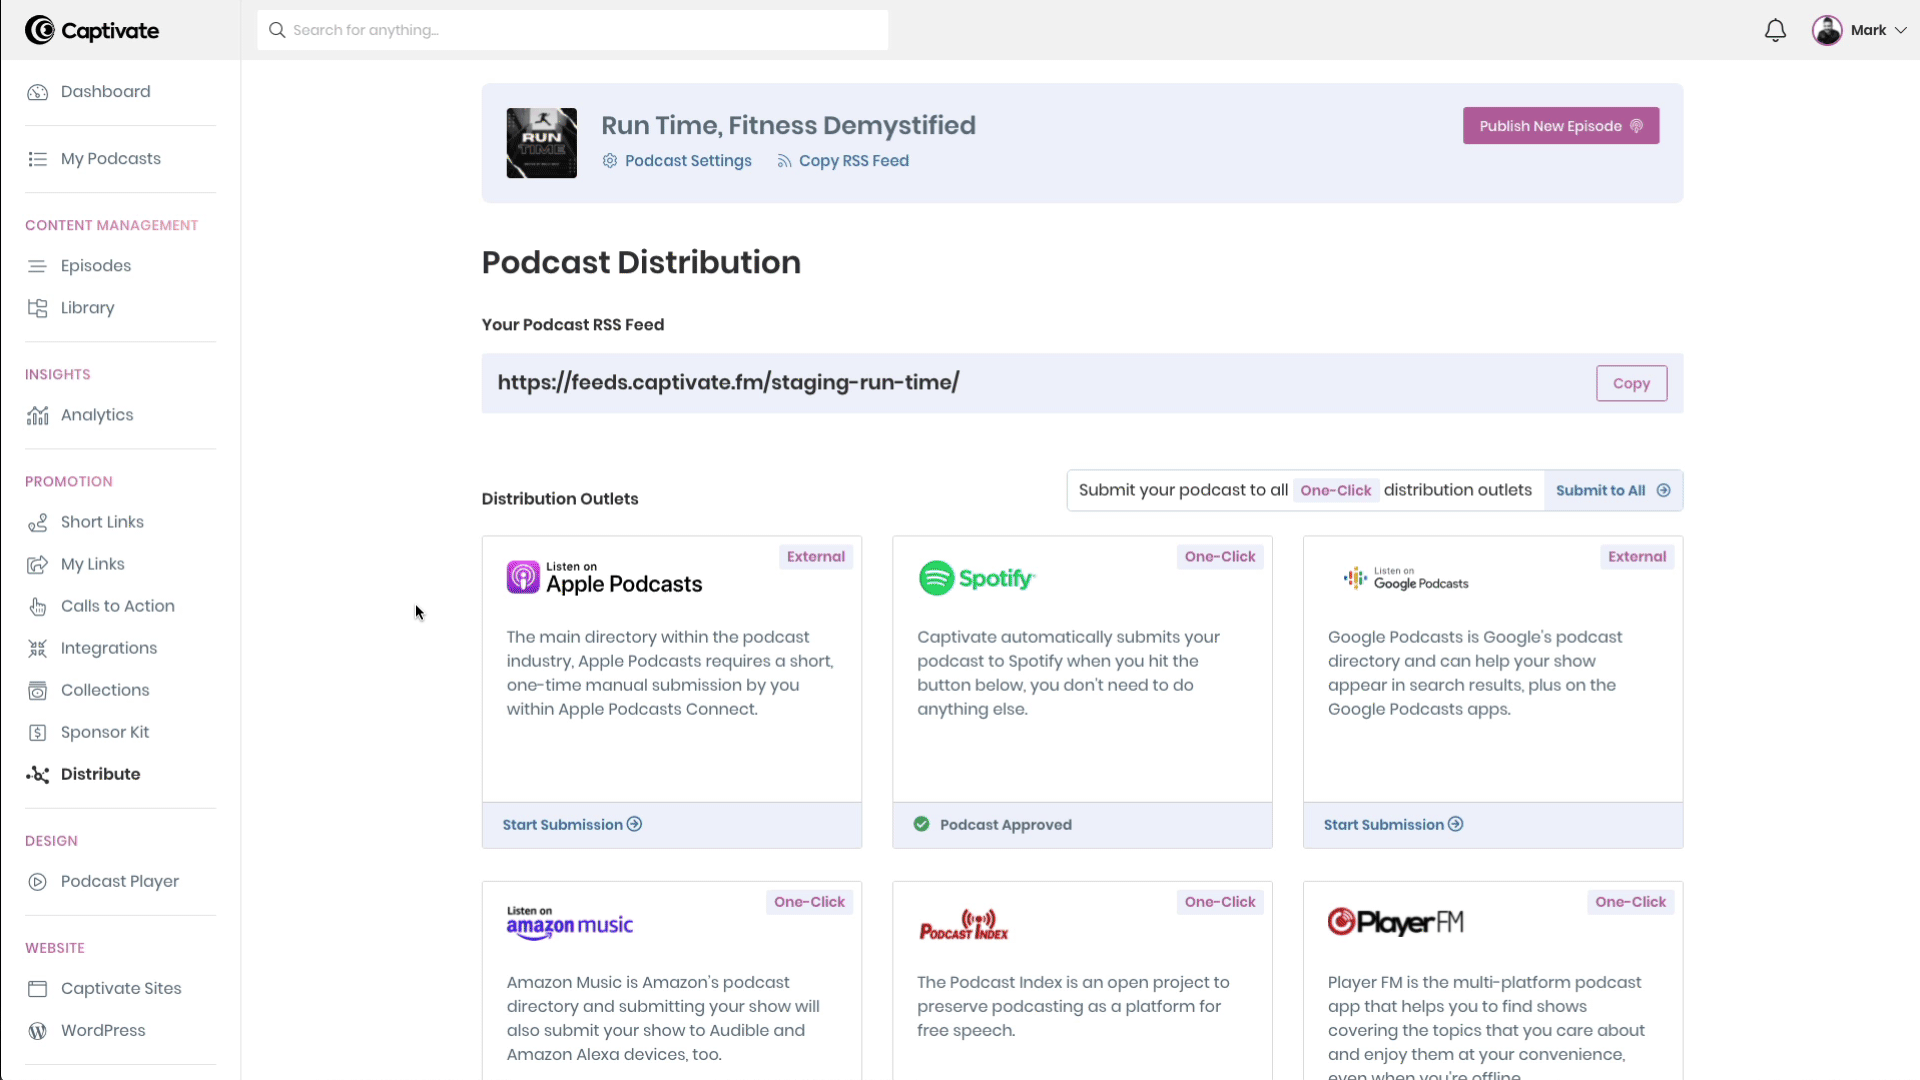 A gif showing the new podcast distribution screen. Captivate 2.0 includes redesigned analytics and distribution screens, featuring a Submit to All button for submission in seconds.